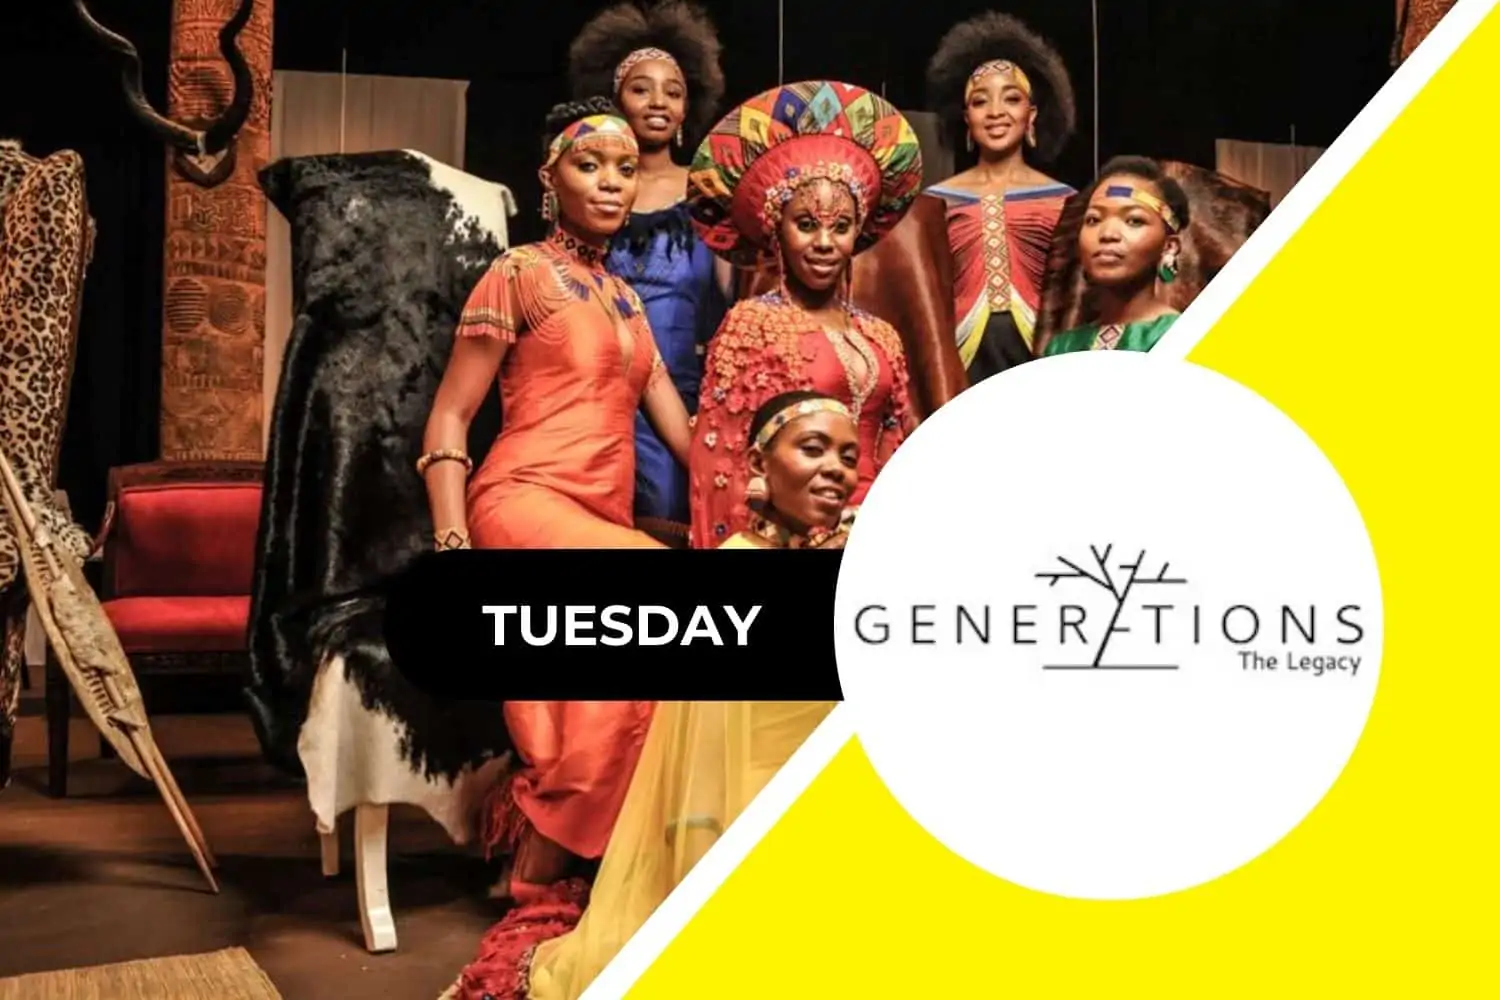 On today's episode of Generations The Legacy Tuesday.